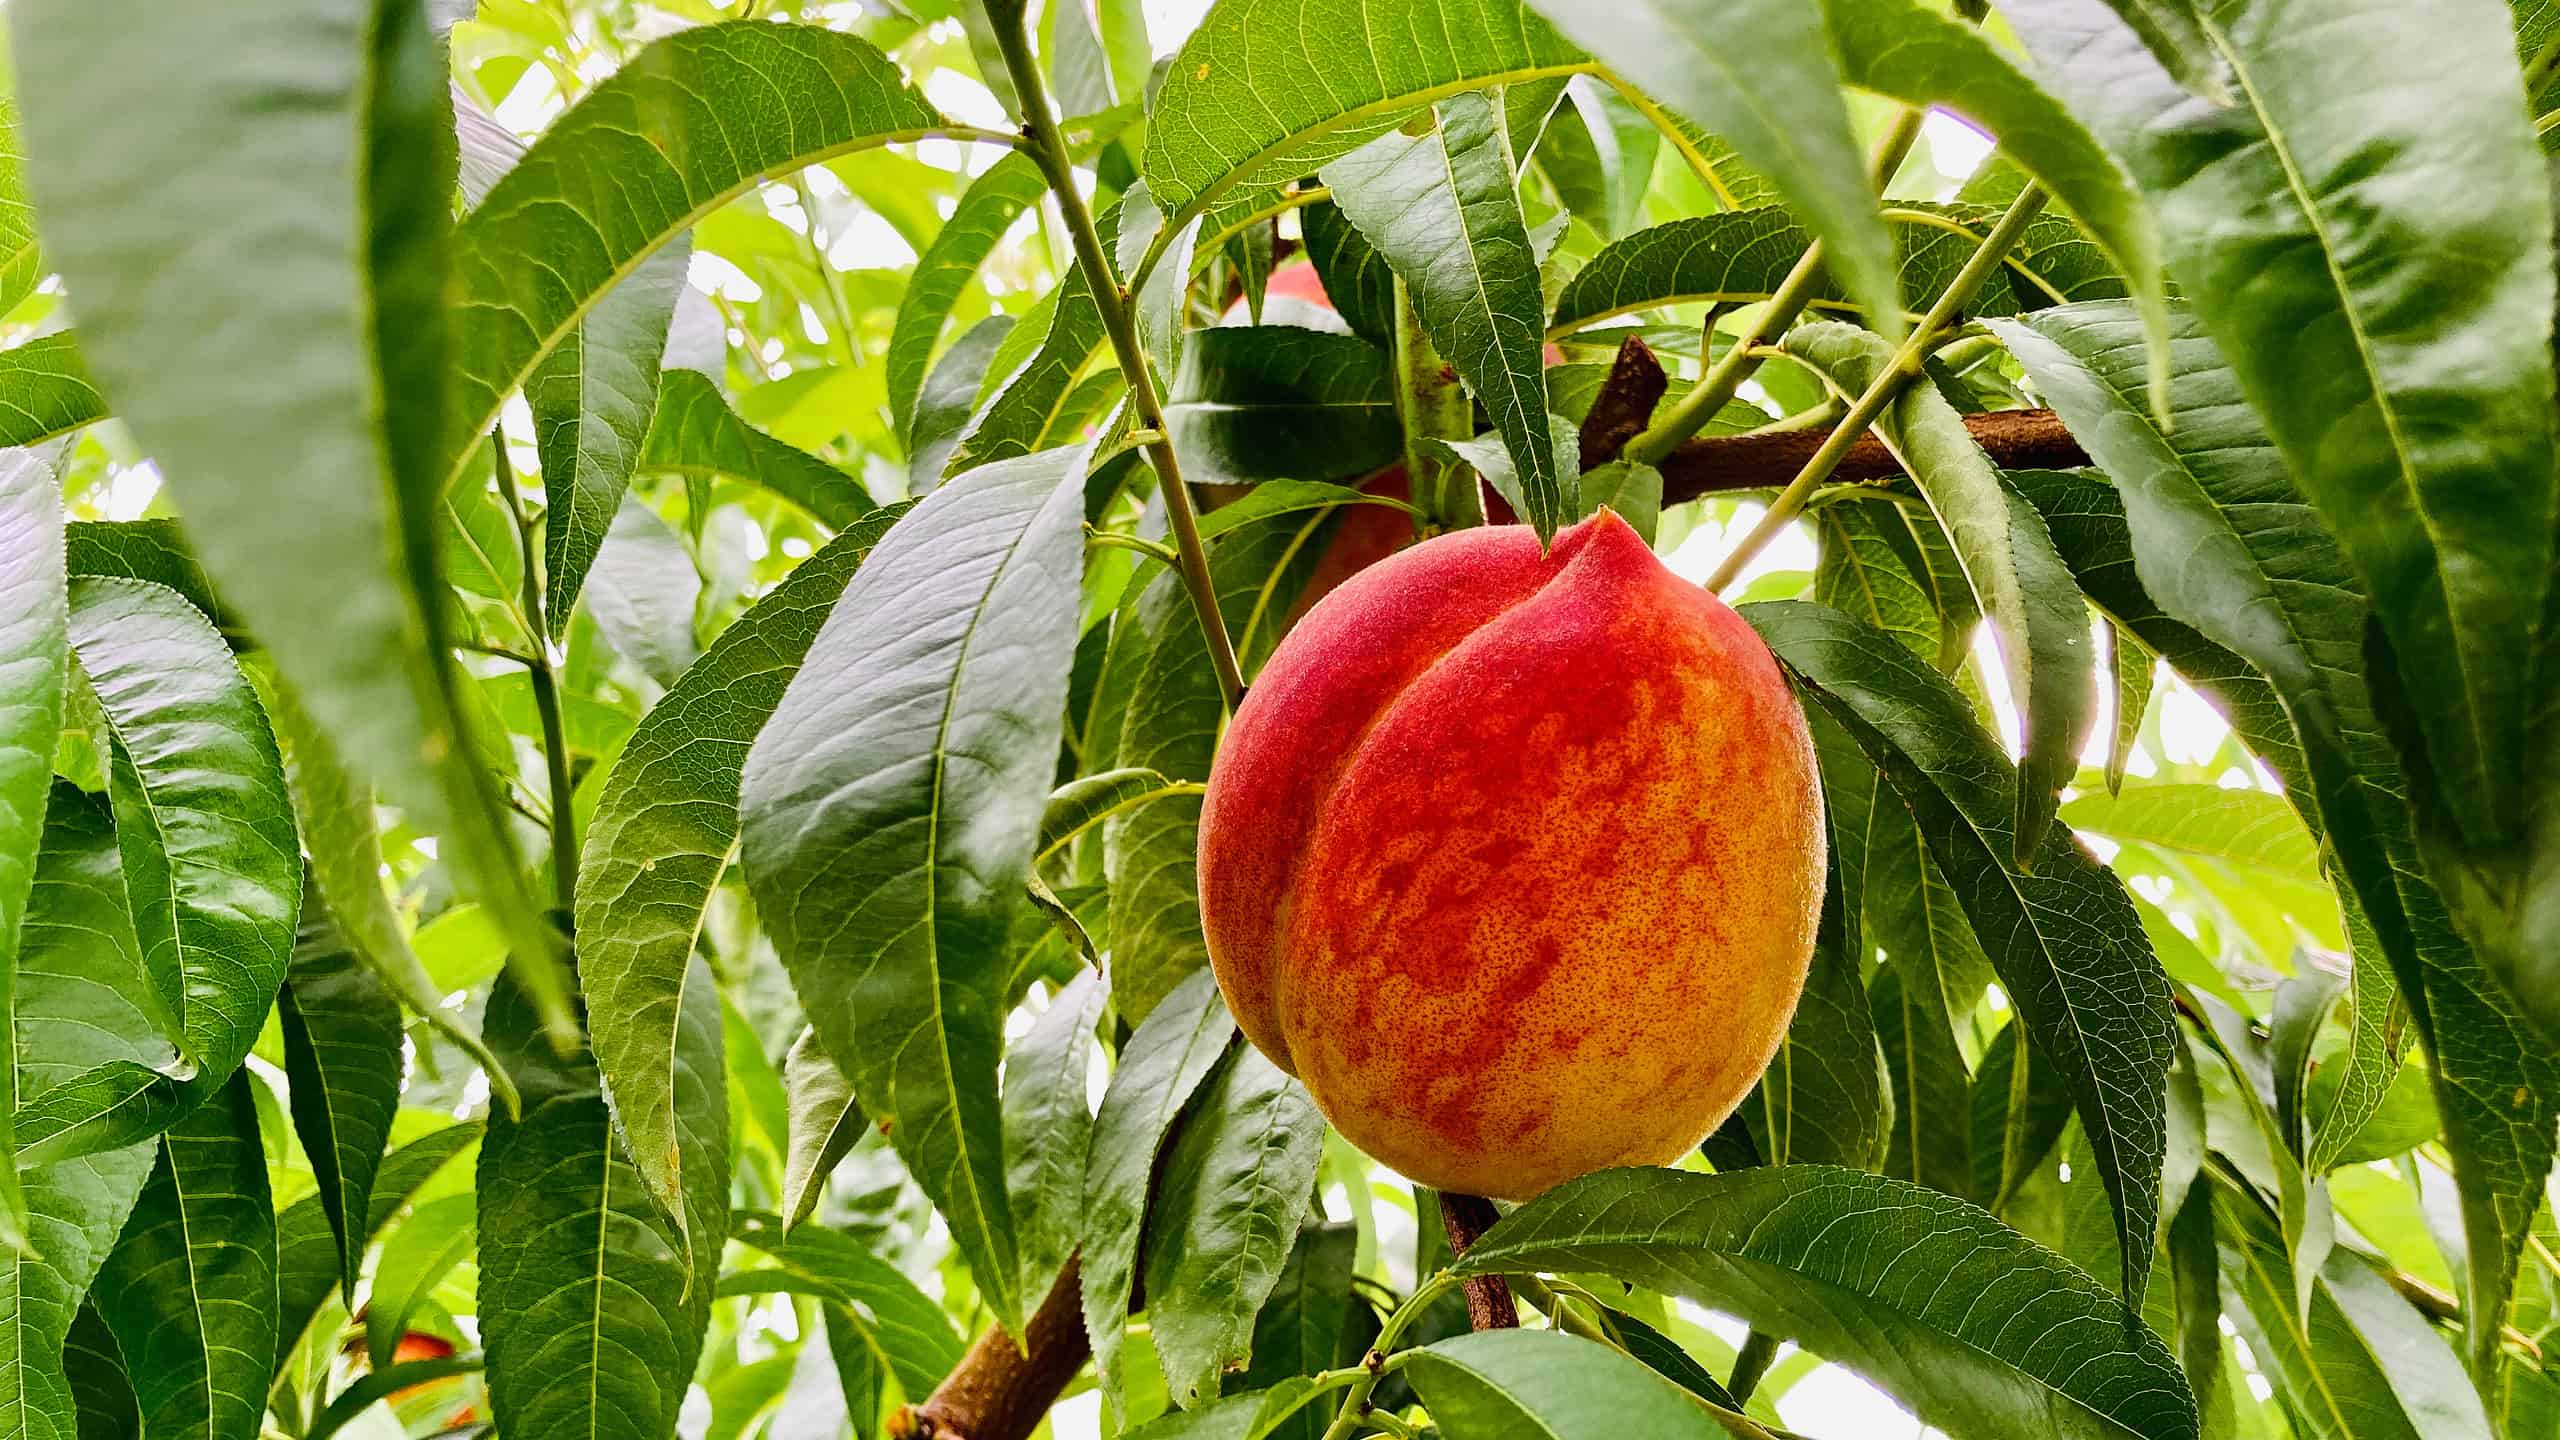 Deep red-yellow, ripe peach of typical shape, growing in a densely deciduous crown of a fruit tree with beautiful green leaves and rarely visible branches.